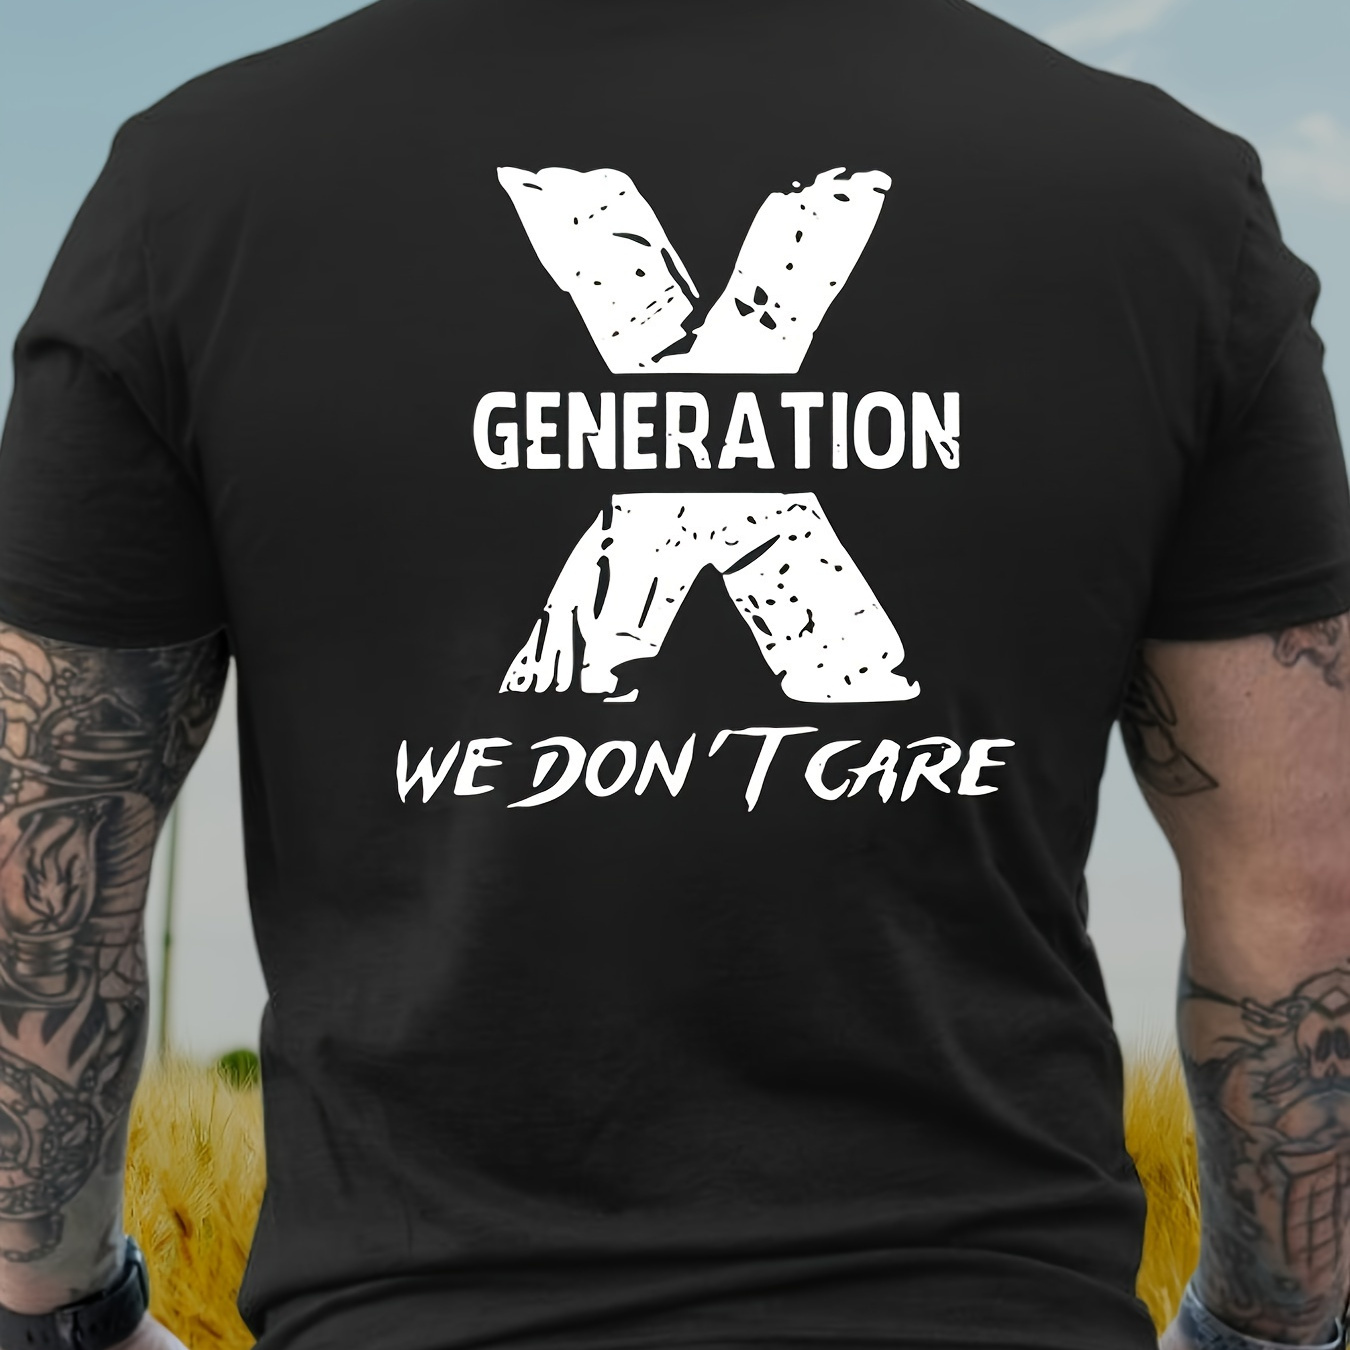 

Generation We Don't Care Printed Men's Heavy Cotton Round Neck Short Sleeve T-shirt, Casual T-shirt, Fashion Comfortable Breathable Light Summer Top